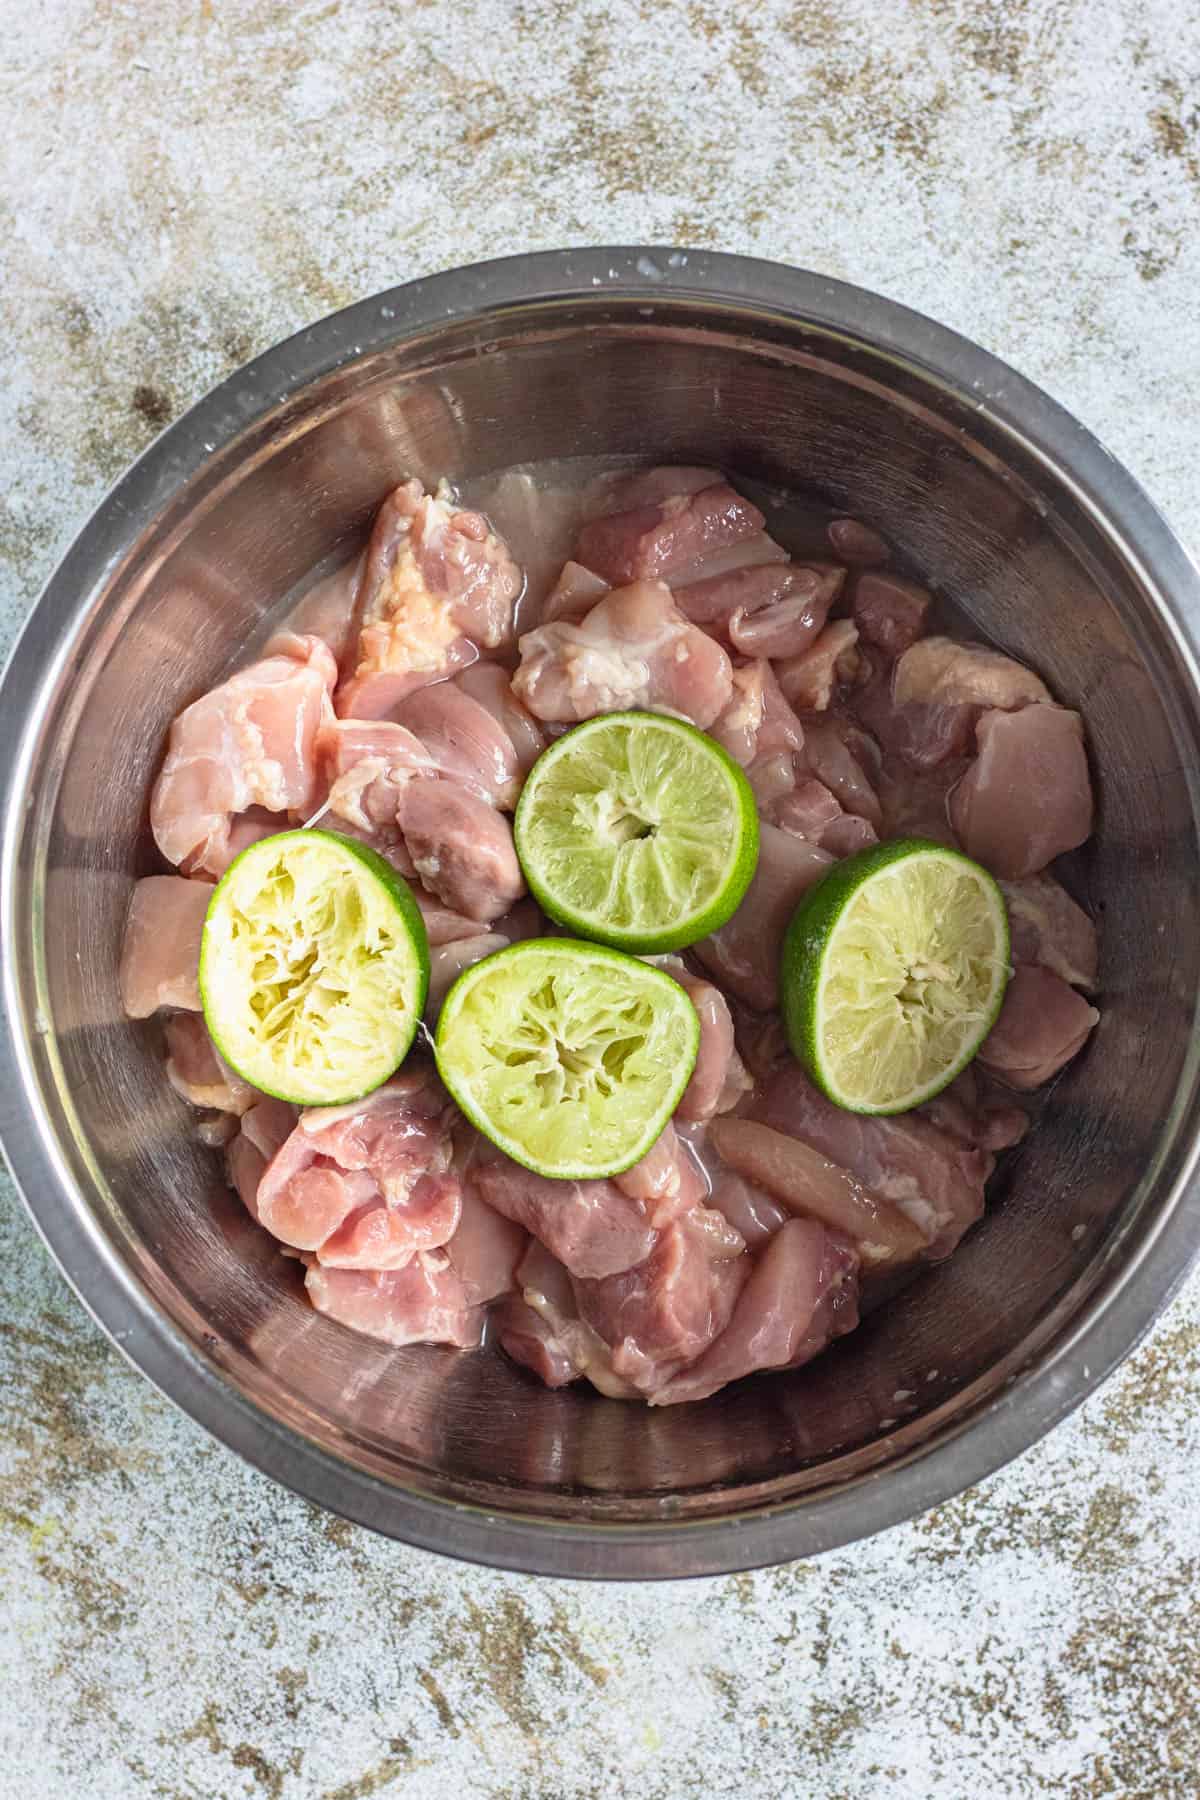 Raw chicken thigh pieces with squeezed limes laying on top in a mixing bowl.